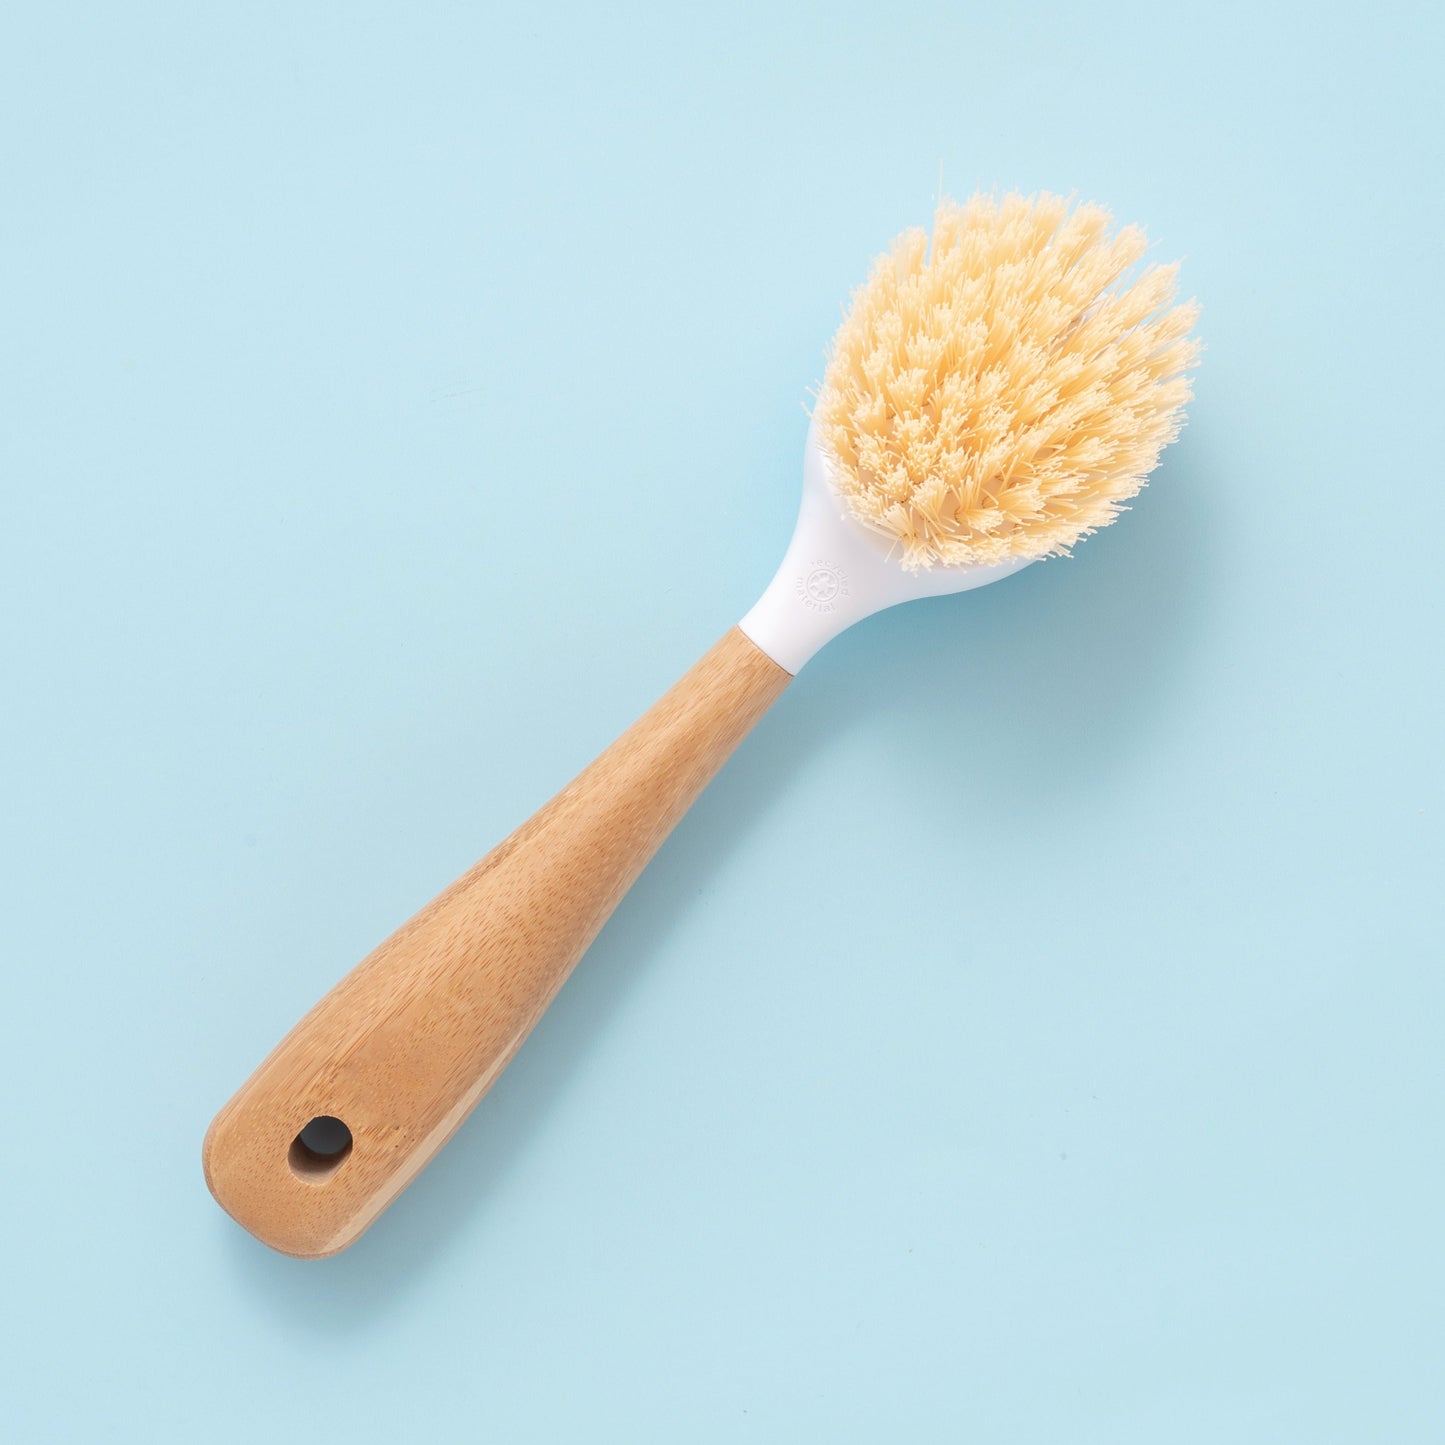 Plastic Kitchen Sink Cleaning Brush, Size: 6 Inch